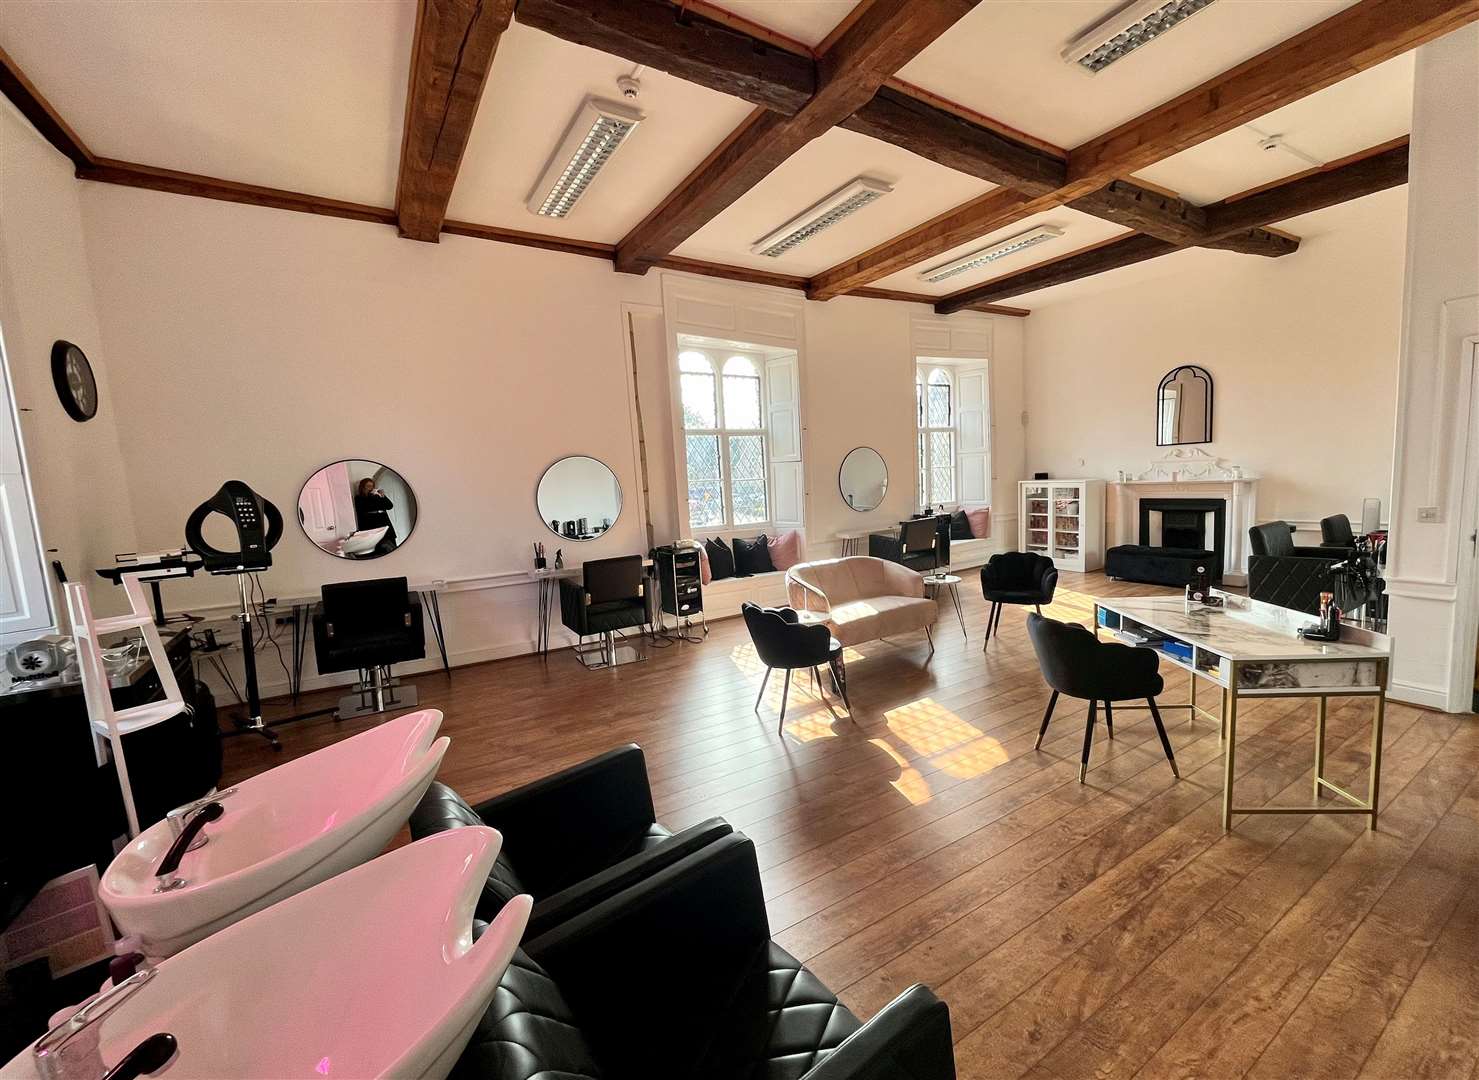 The salon has opened after an £8,000 refurbishment. Picture: Nicola Rose